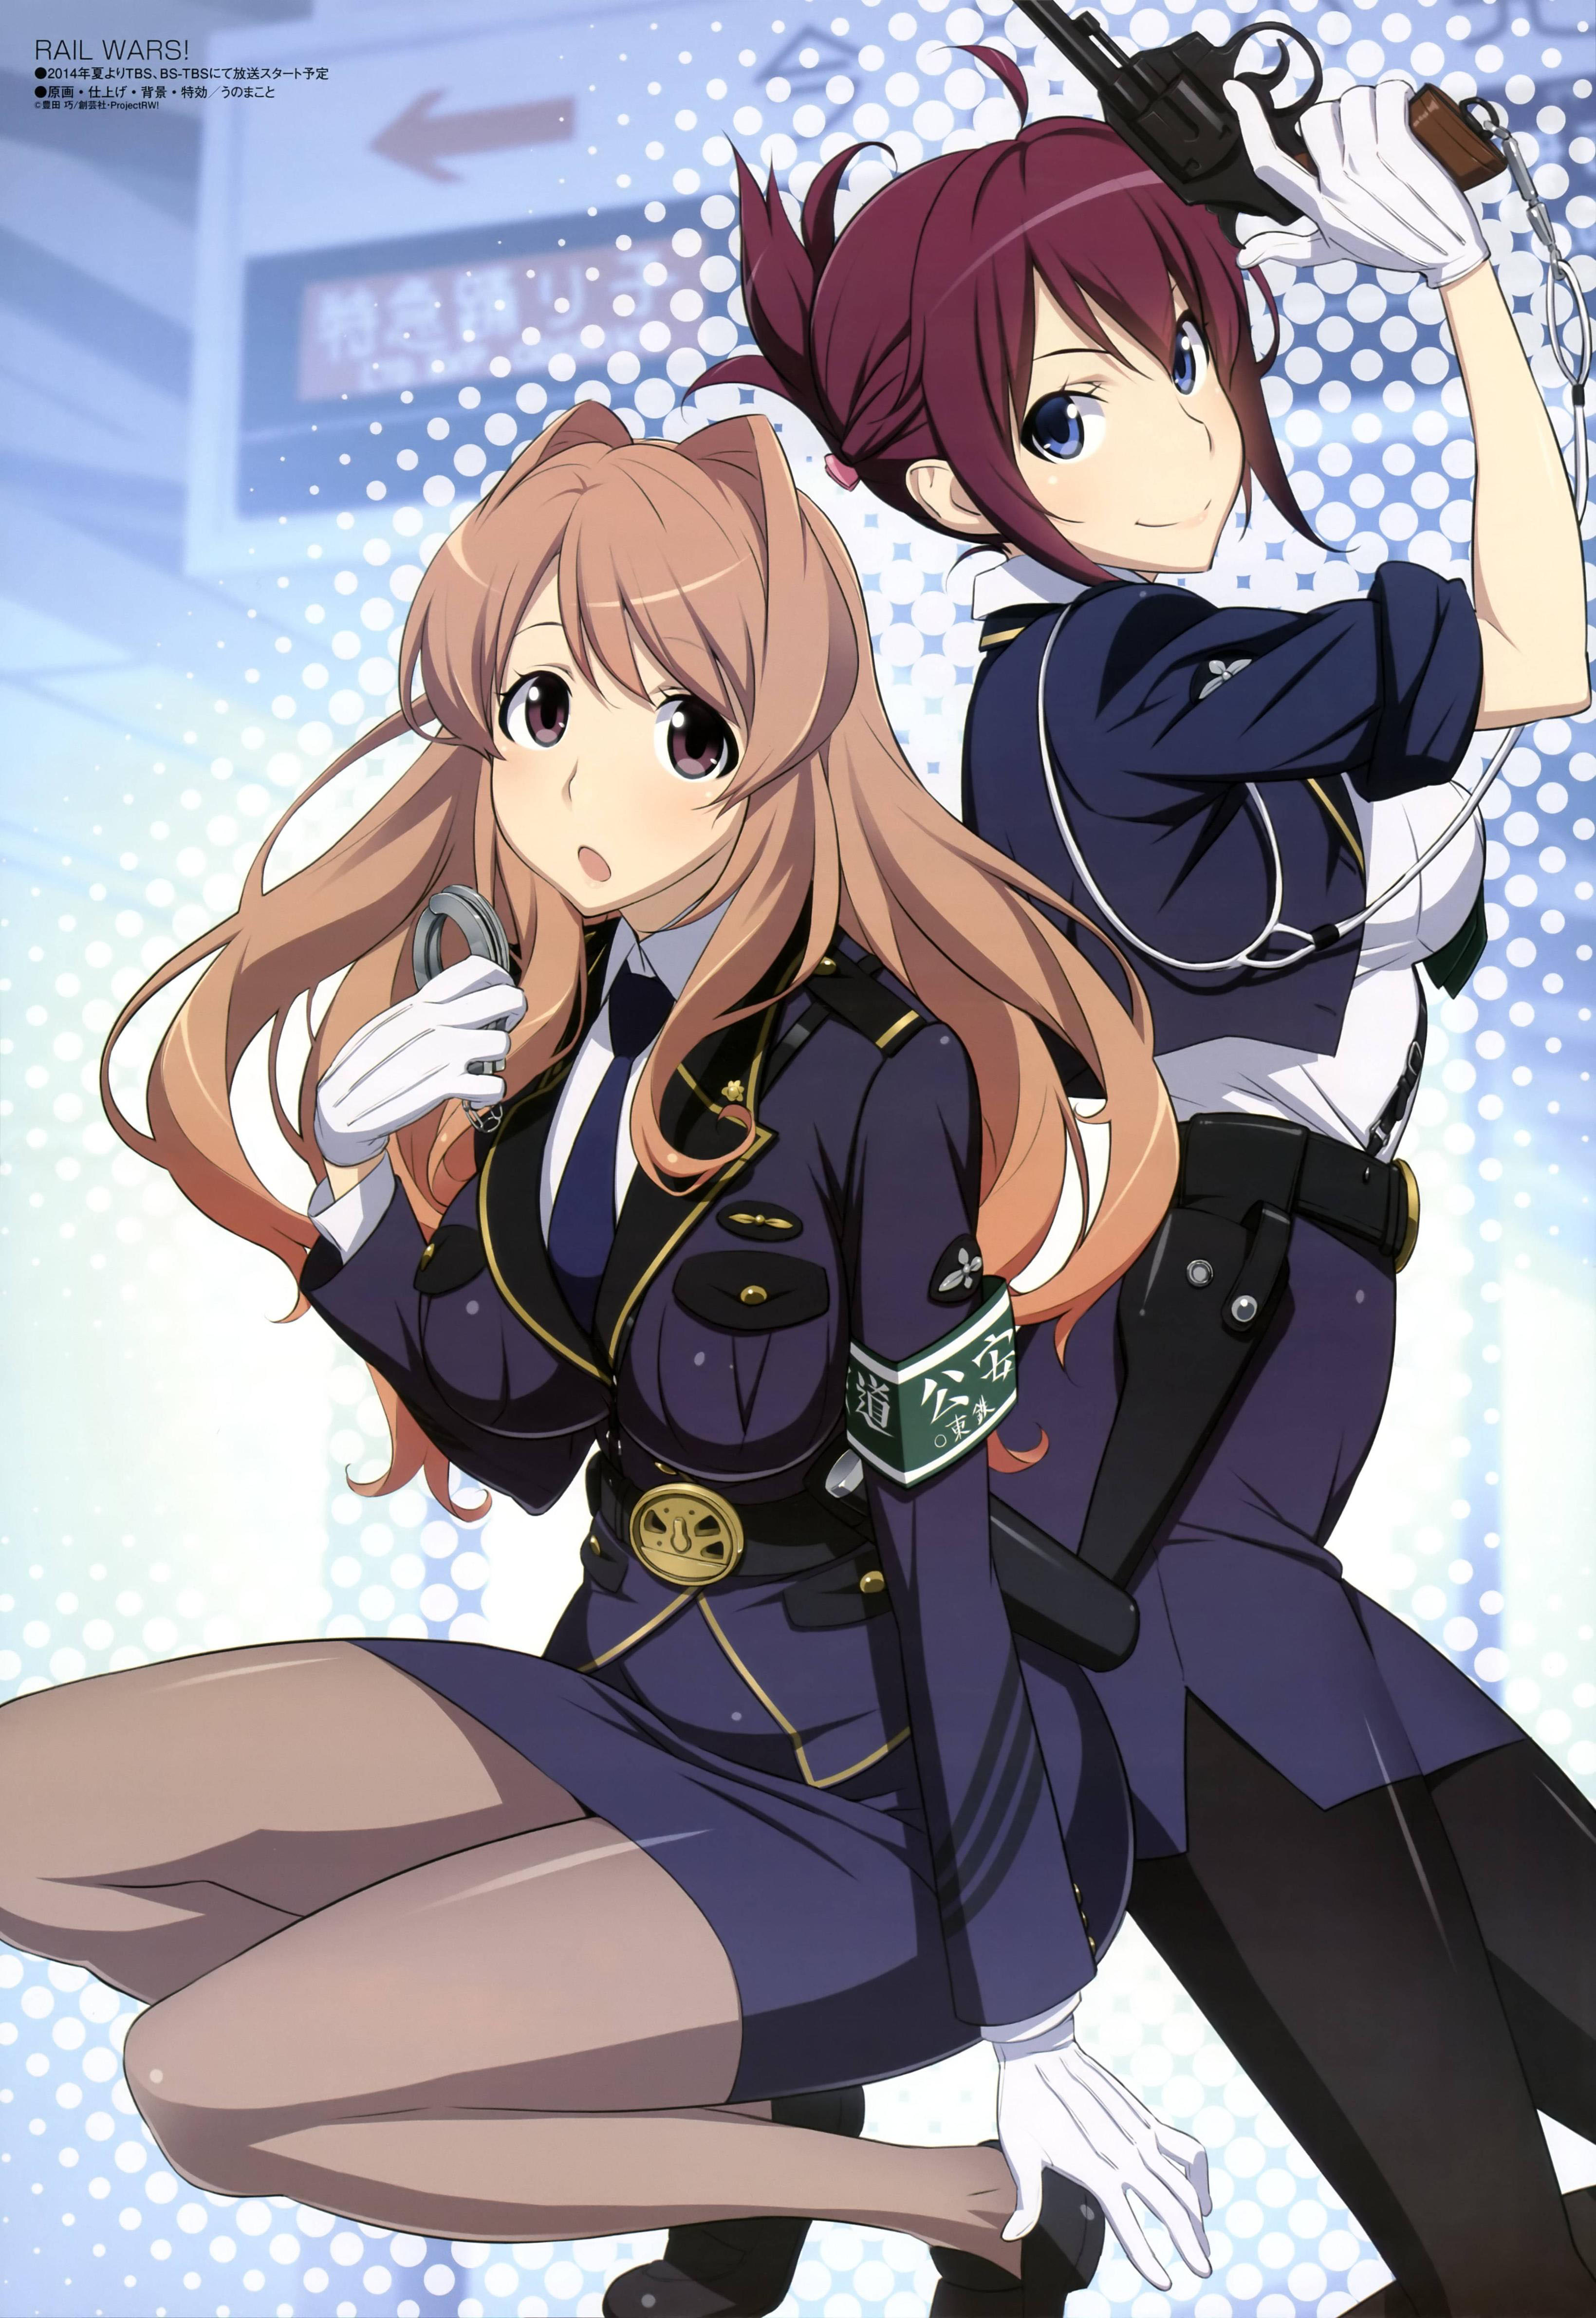 Rail Wars! Image Collection 12